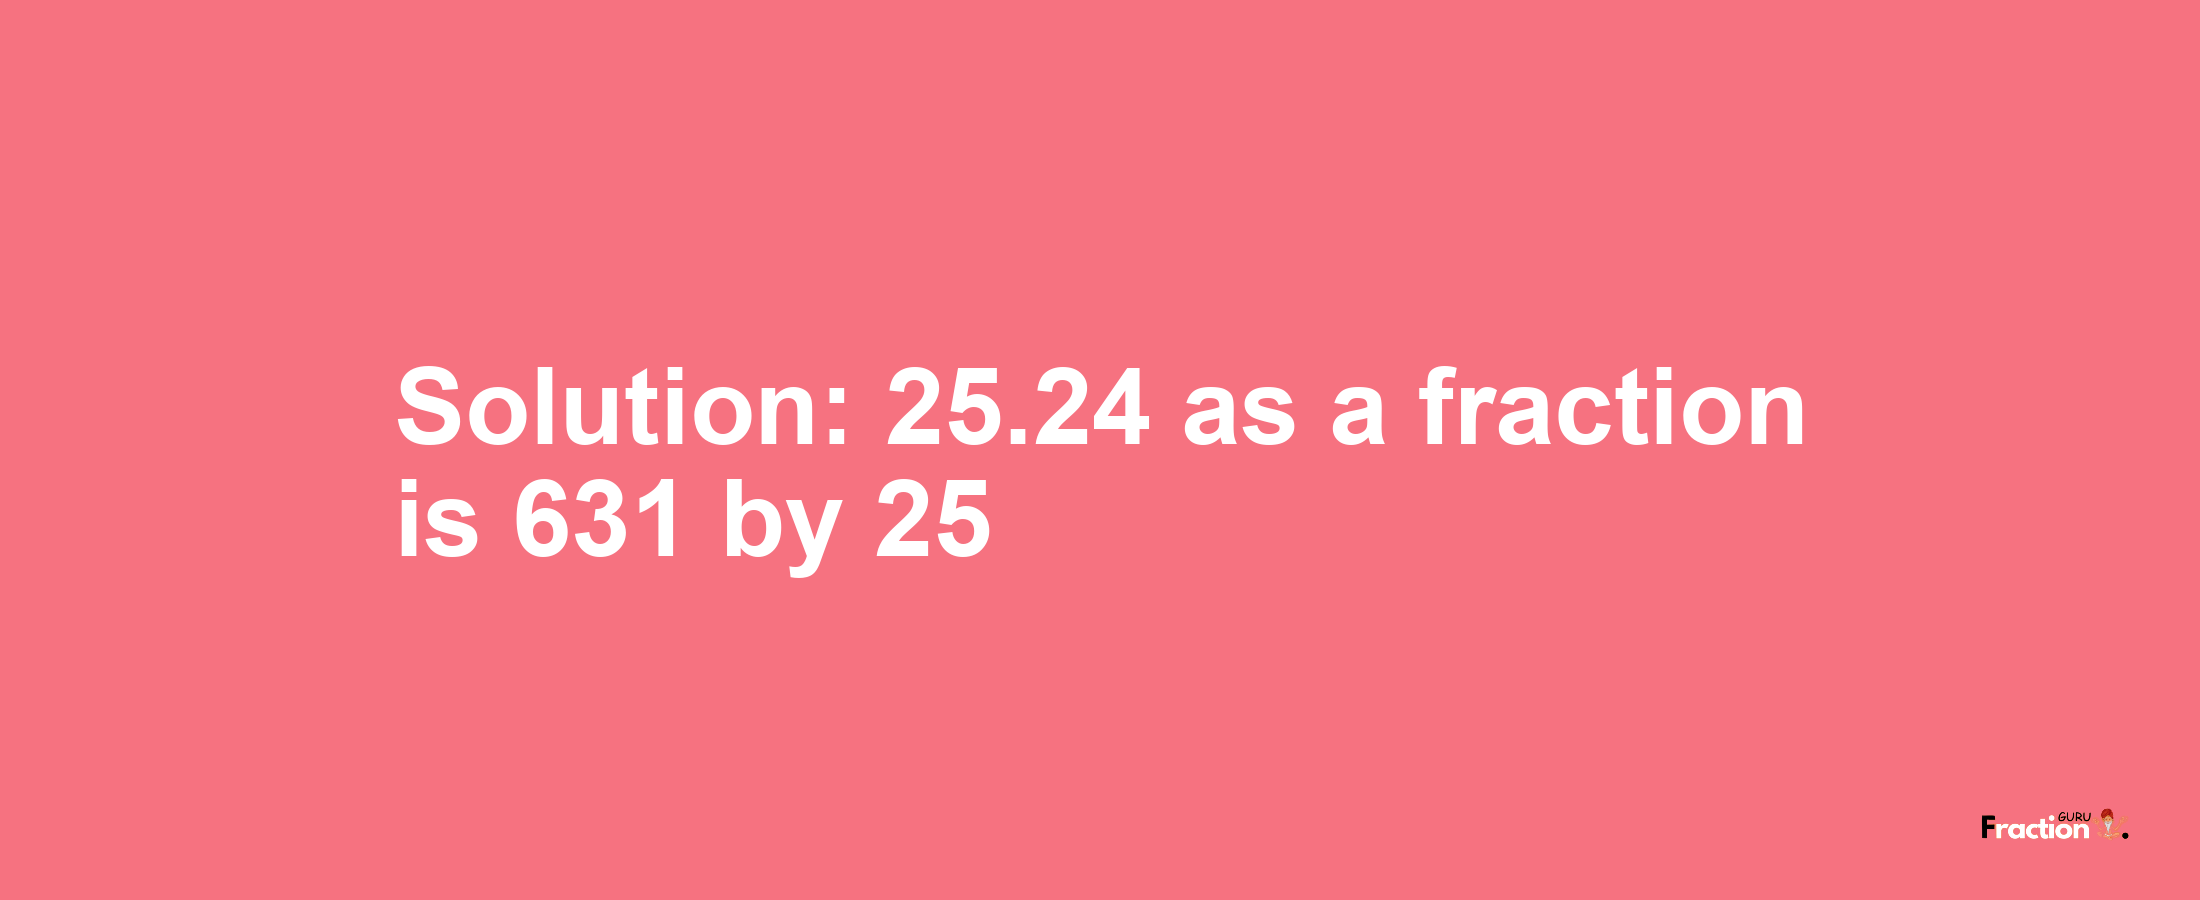 Solution:25.24 as a fraction is 631/25